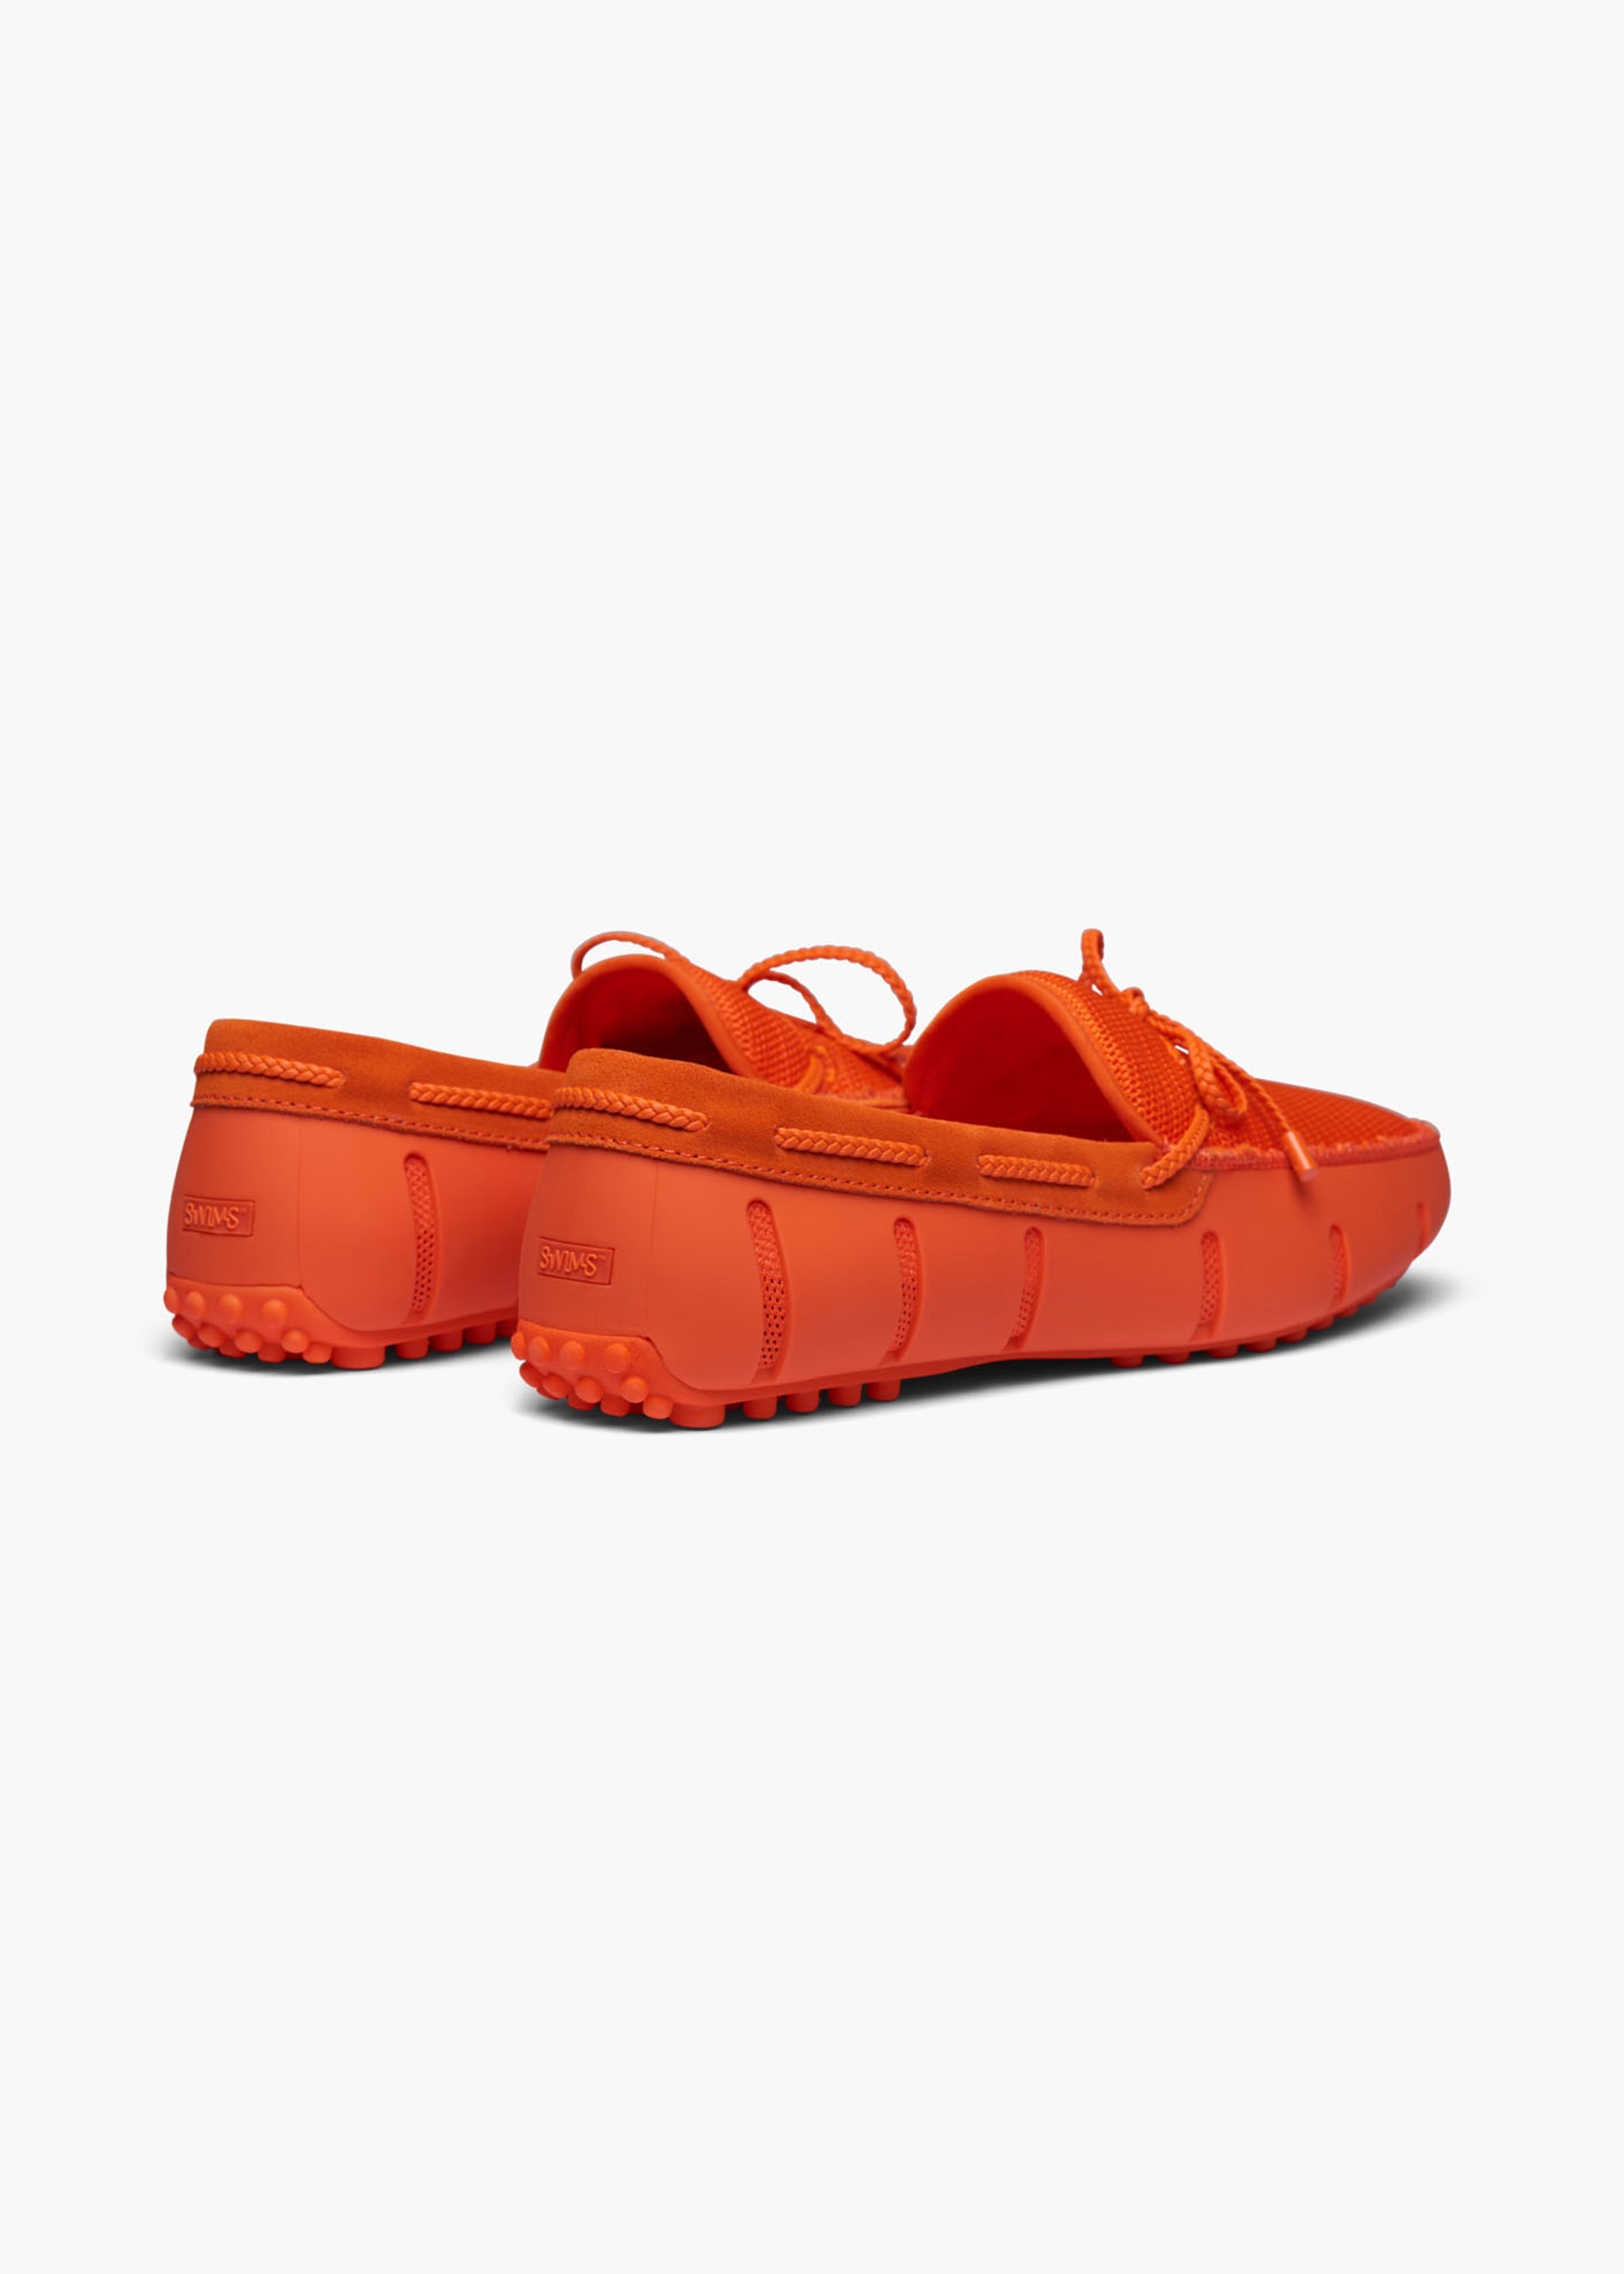 Braided Lace Lux Loafer Driver - background::white,variant::SWIMS Orange